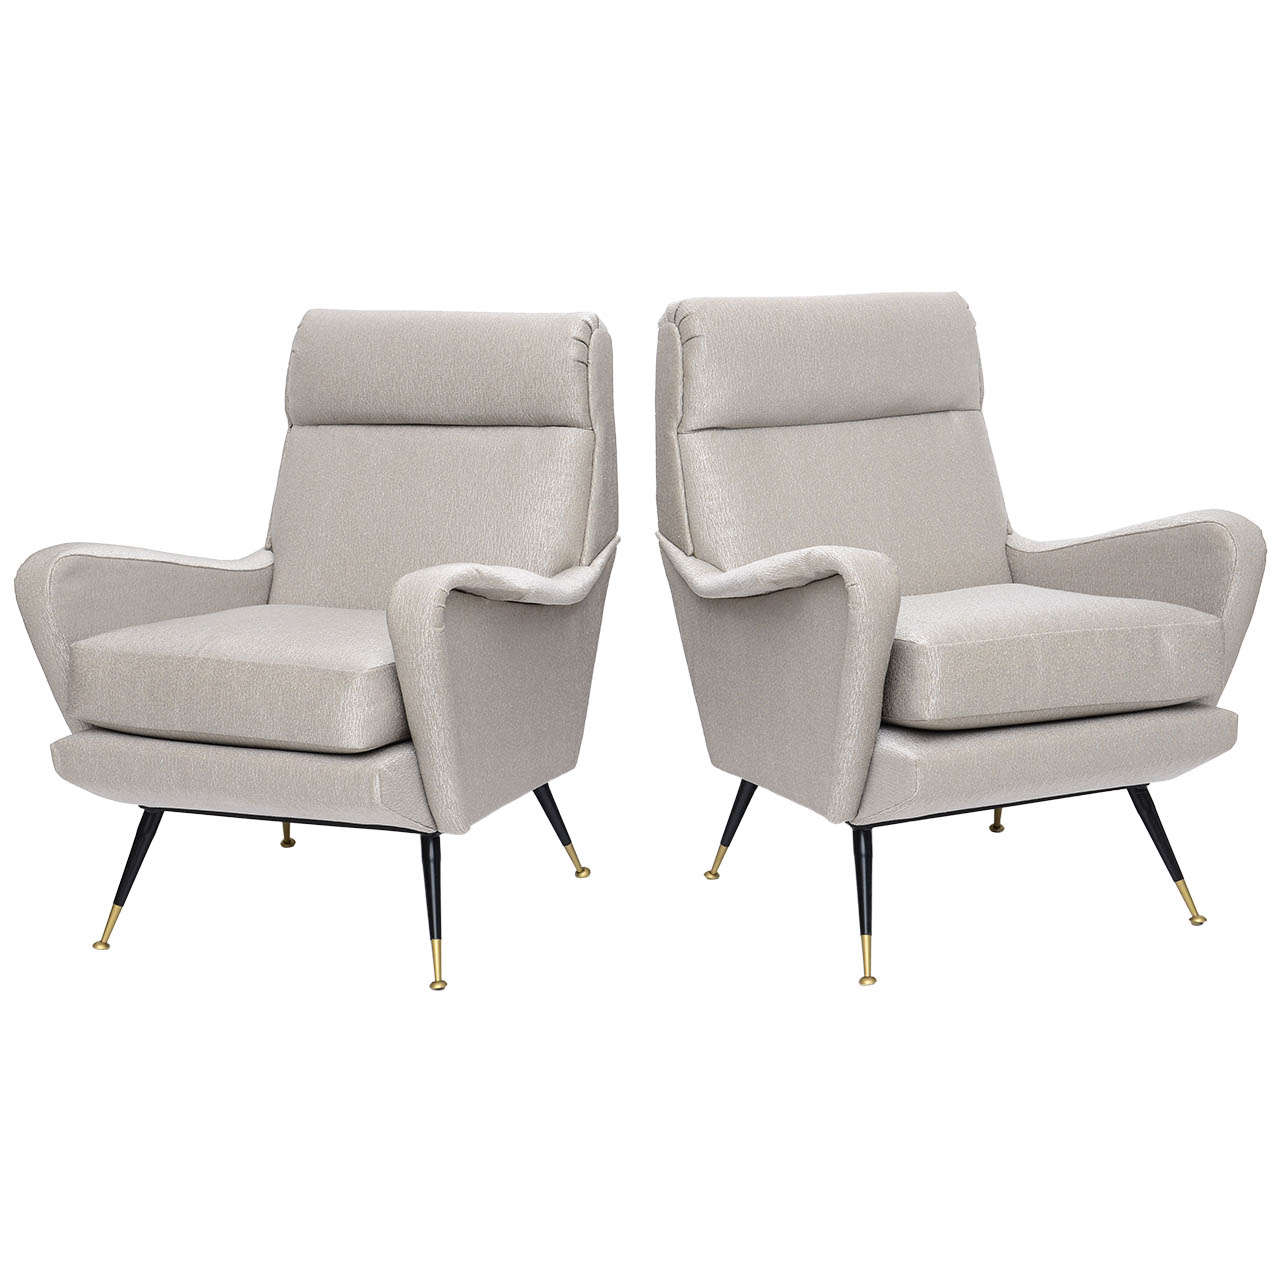 Pair of Italian Brass Enameled and Upholstered Armchairs, Style Carlo de Carli